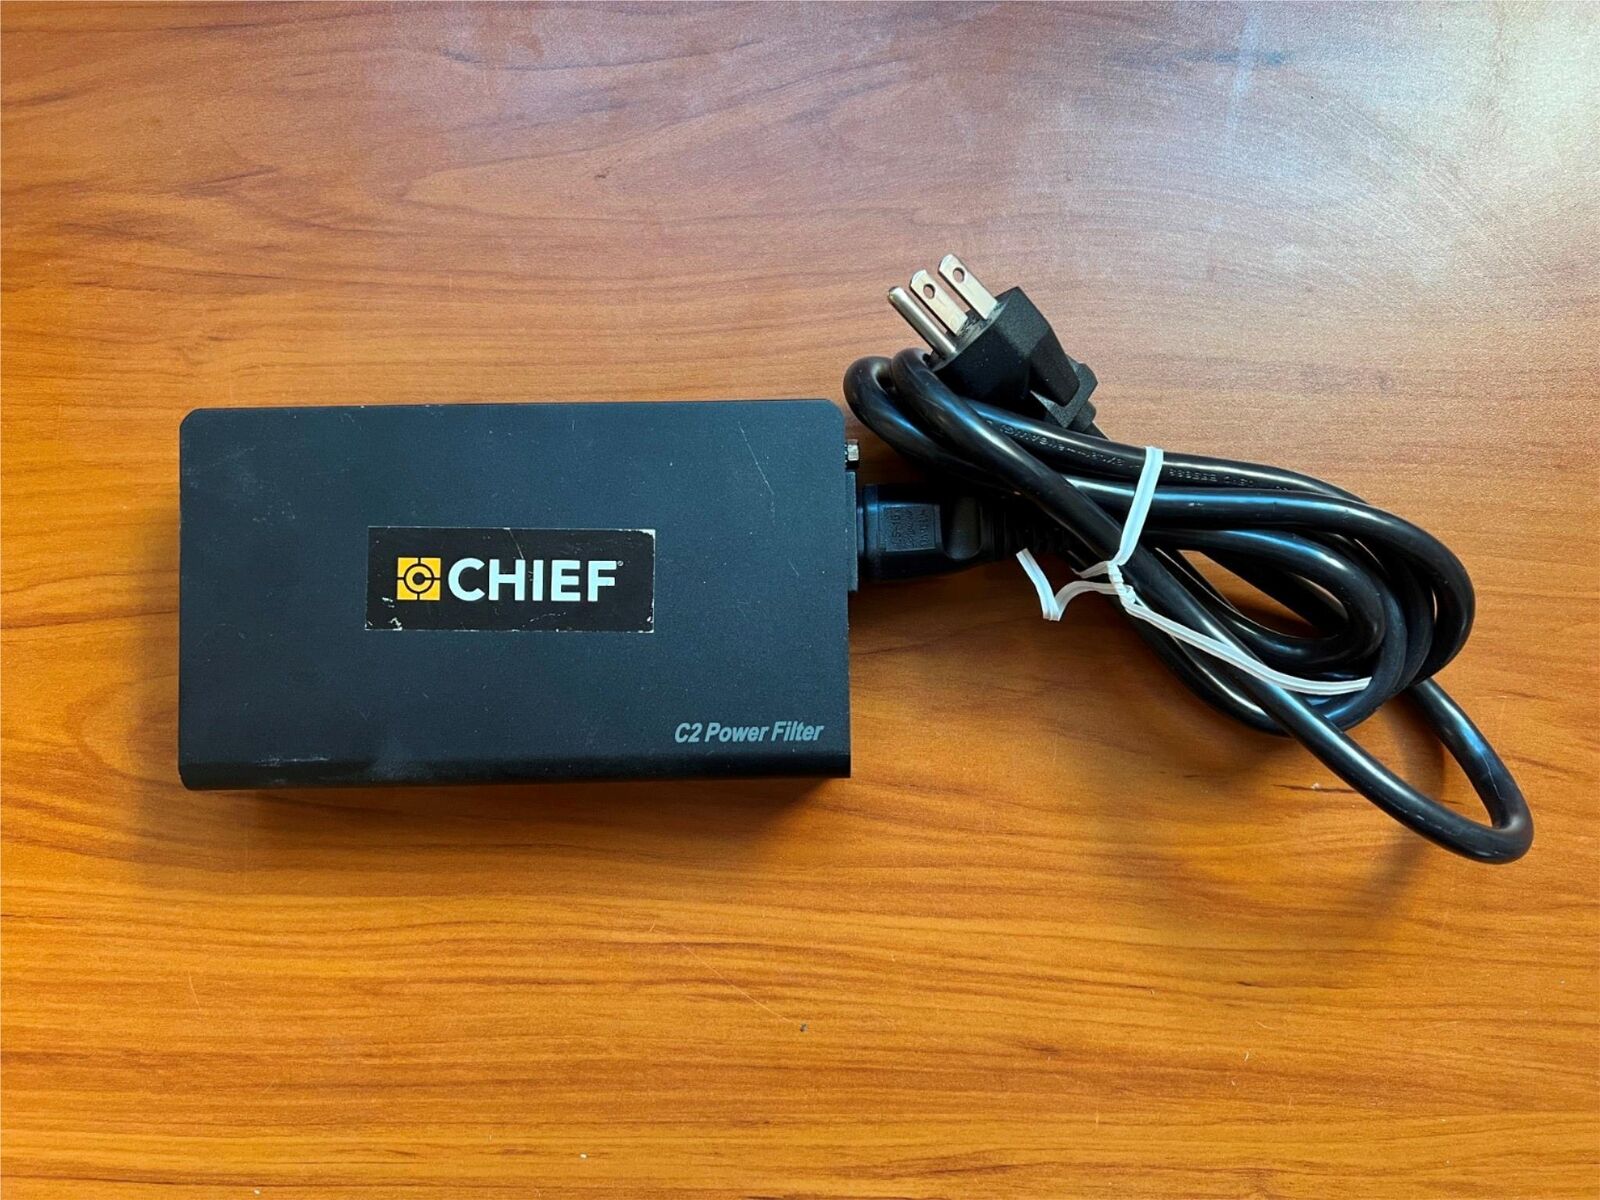 CHIEF APC C2 Power Filter Surge Protector W/ Power Cable